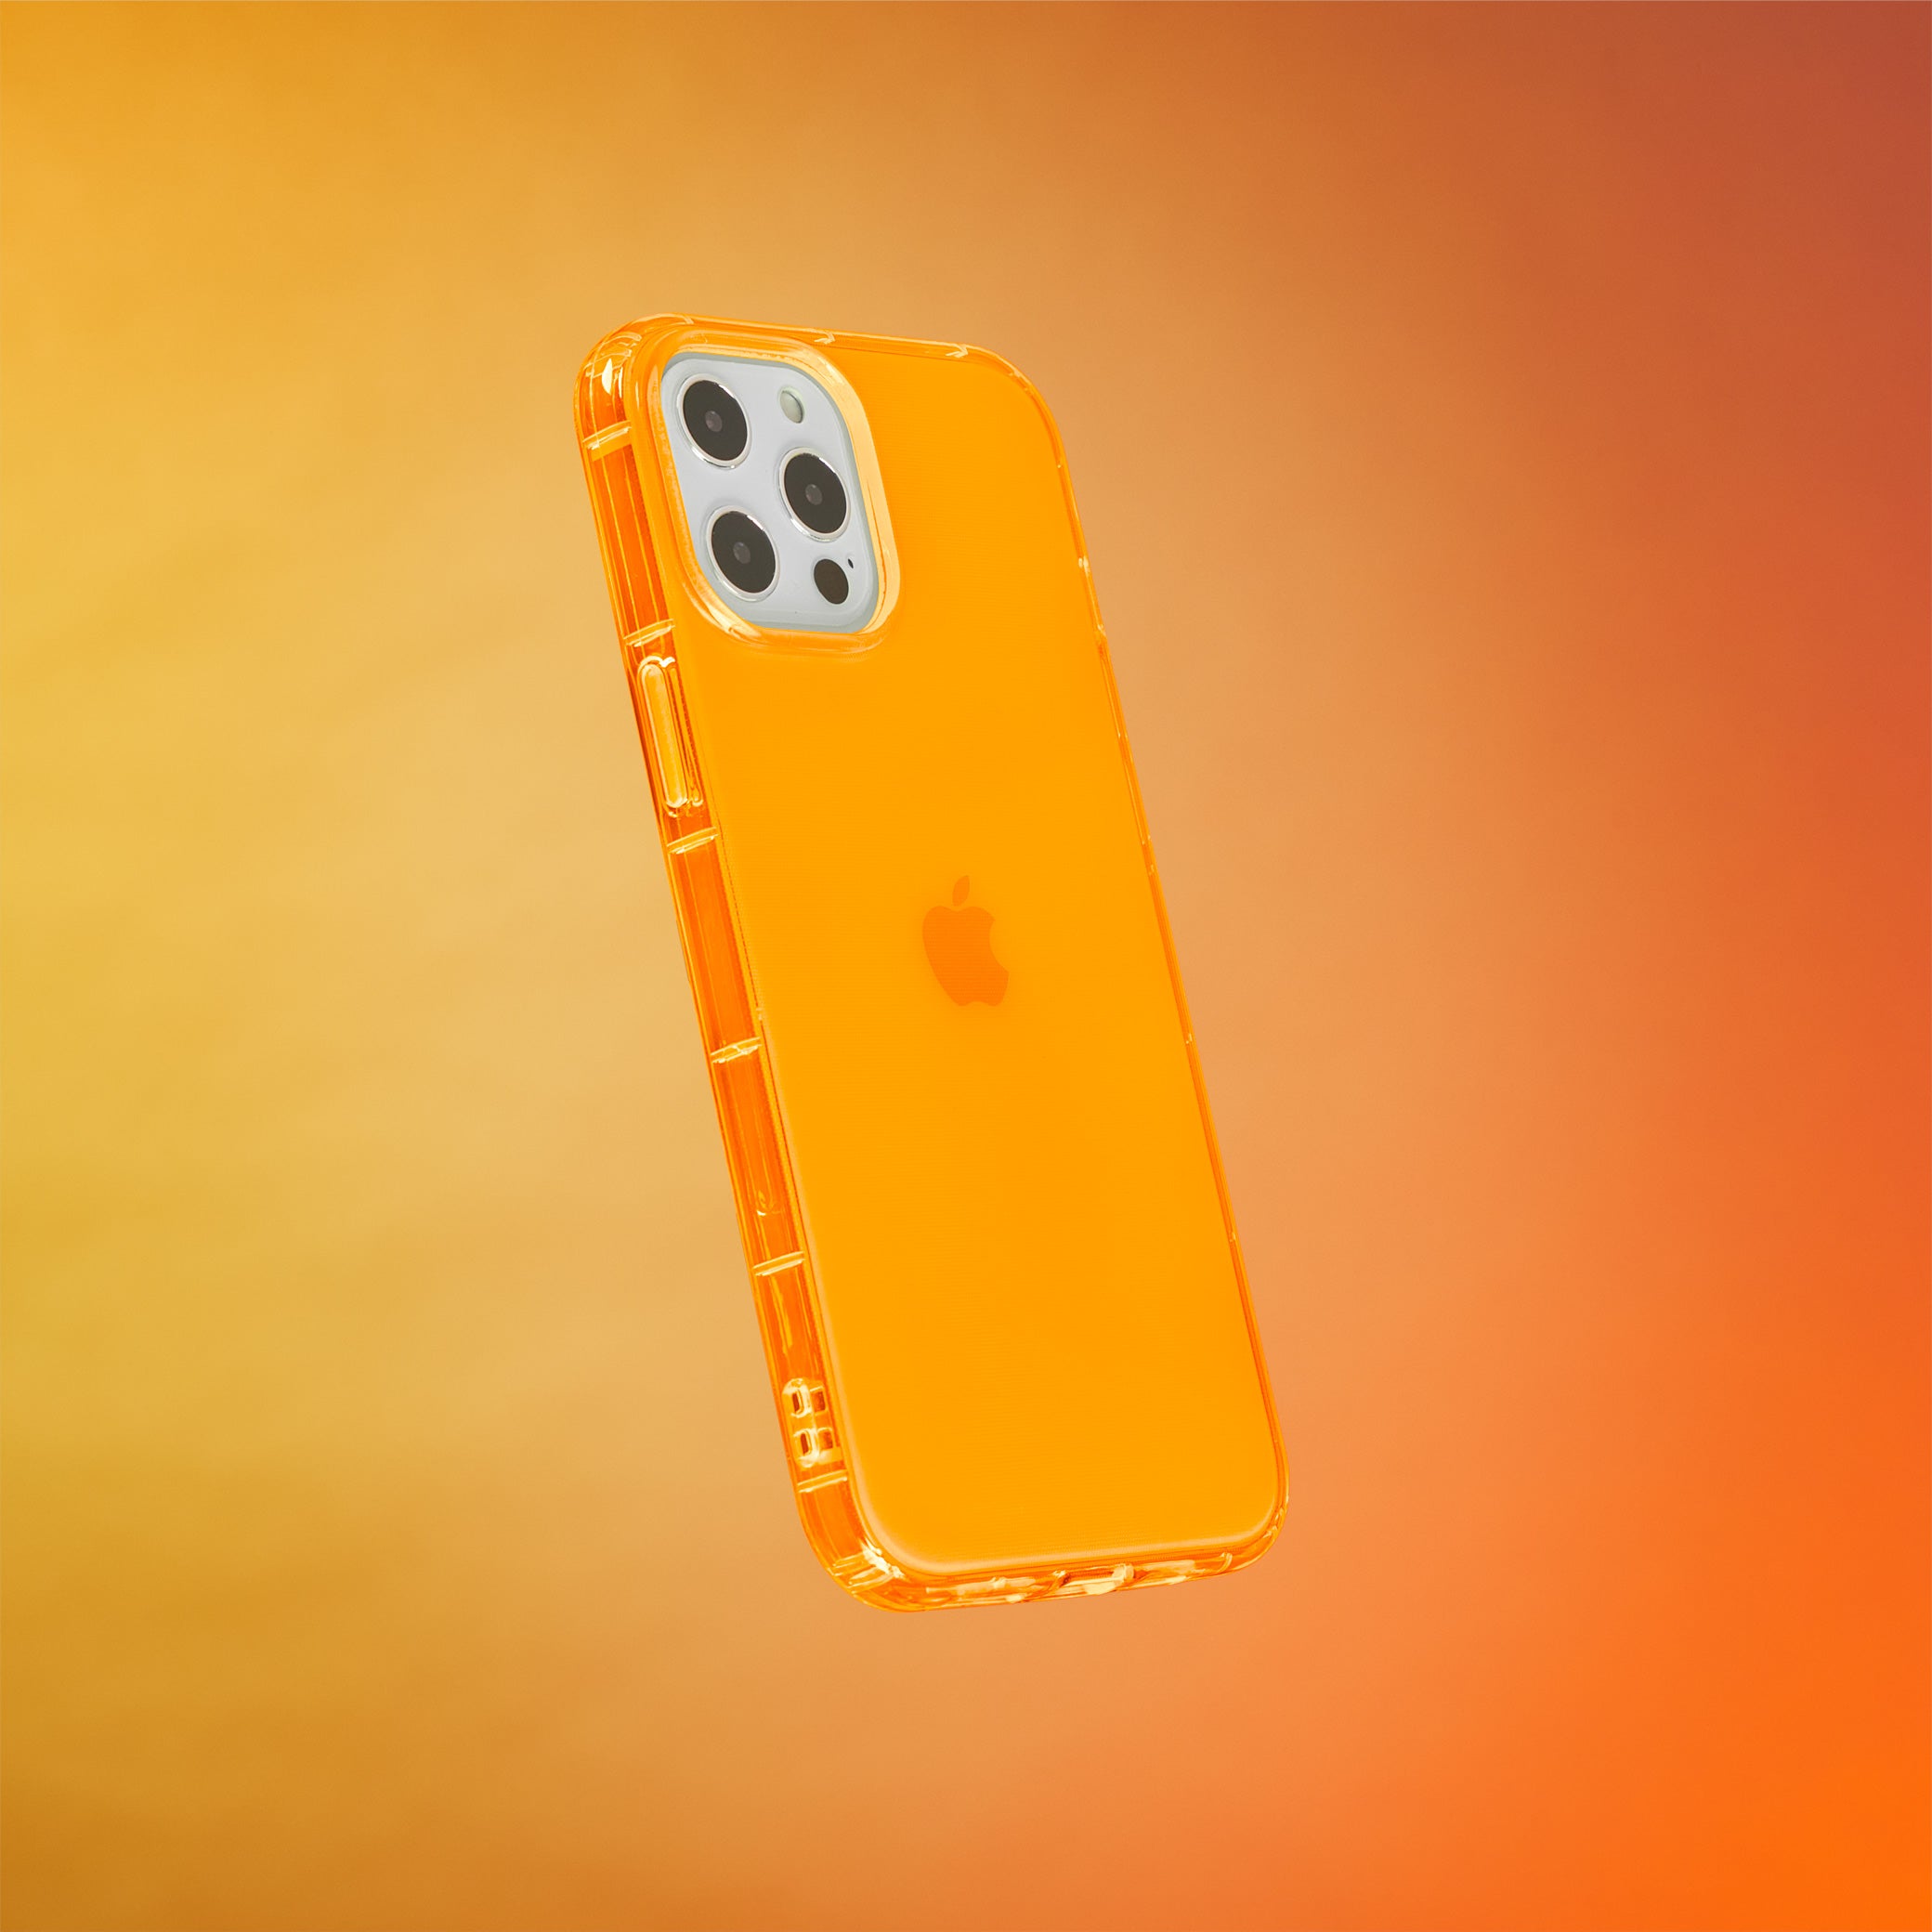 Highlighter Case for iPhone 12 Pro Max - Intense Bright Orange